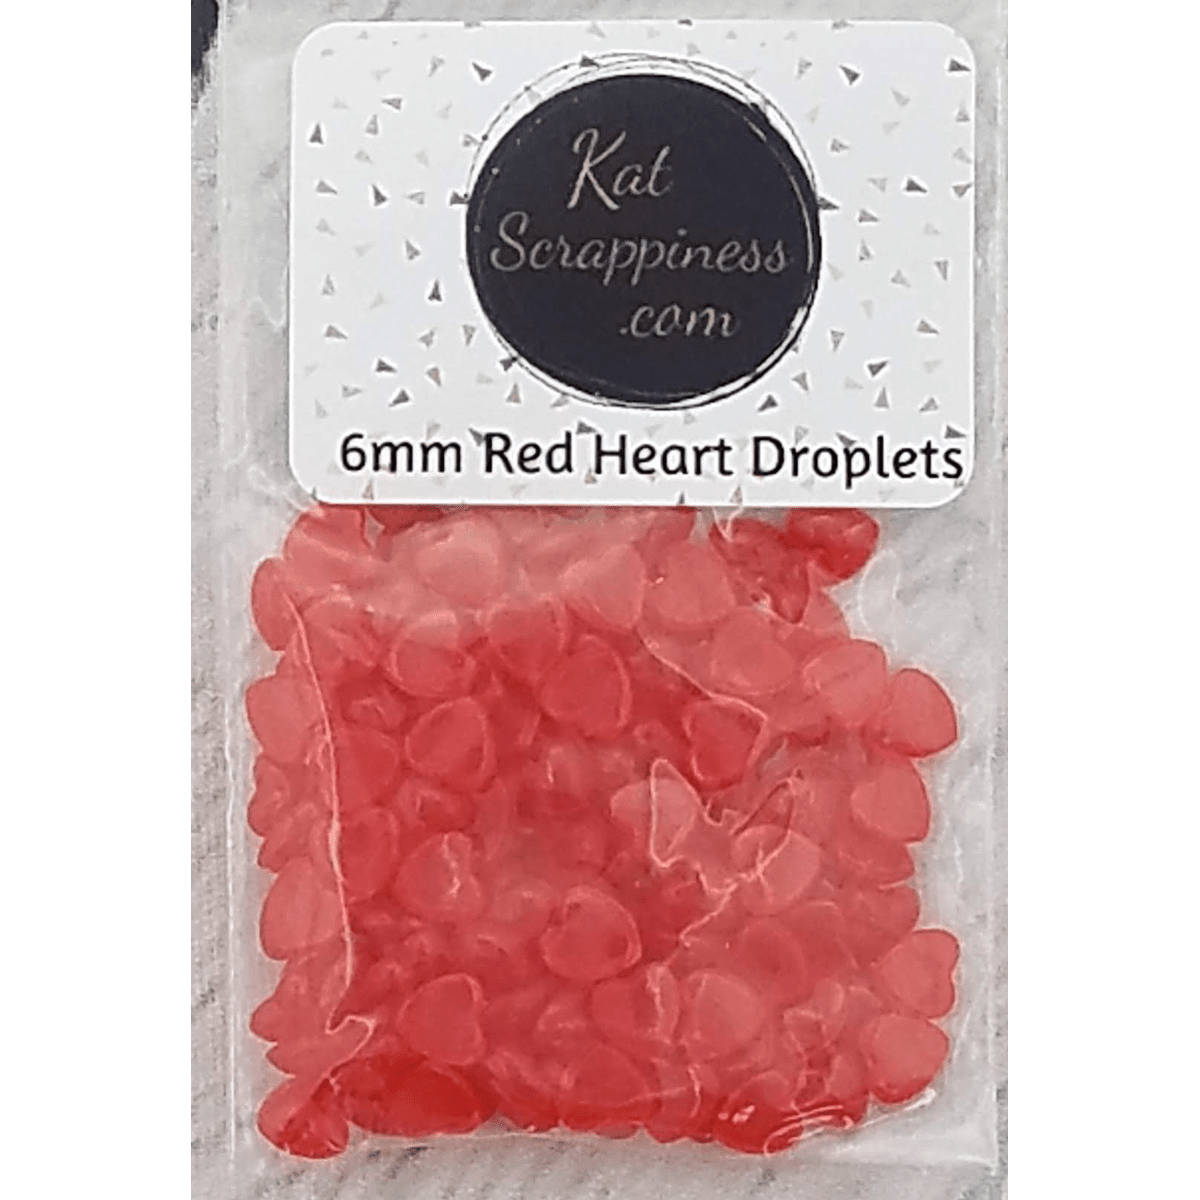 6mm Red Heart Droplets - Kat Scrappiness